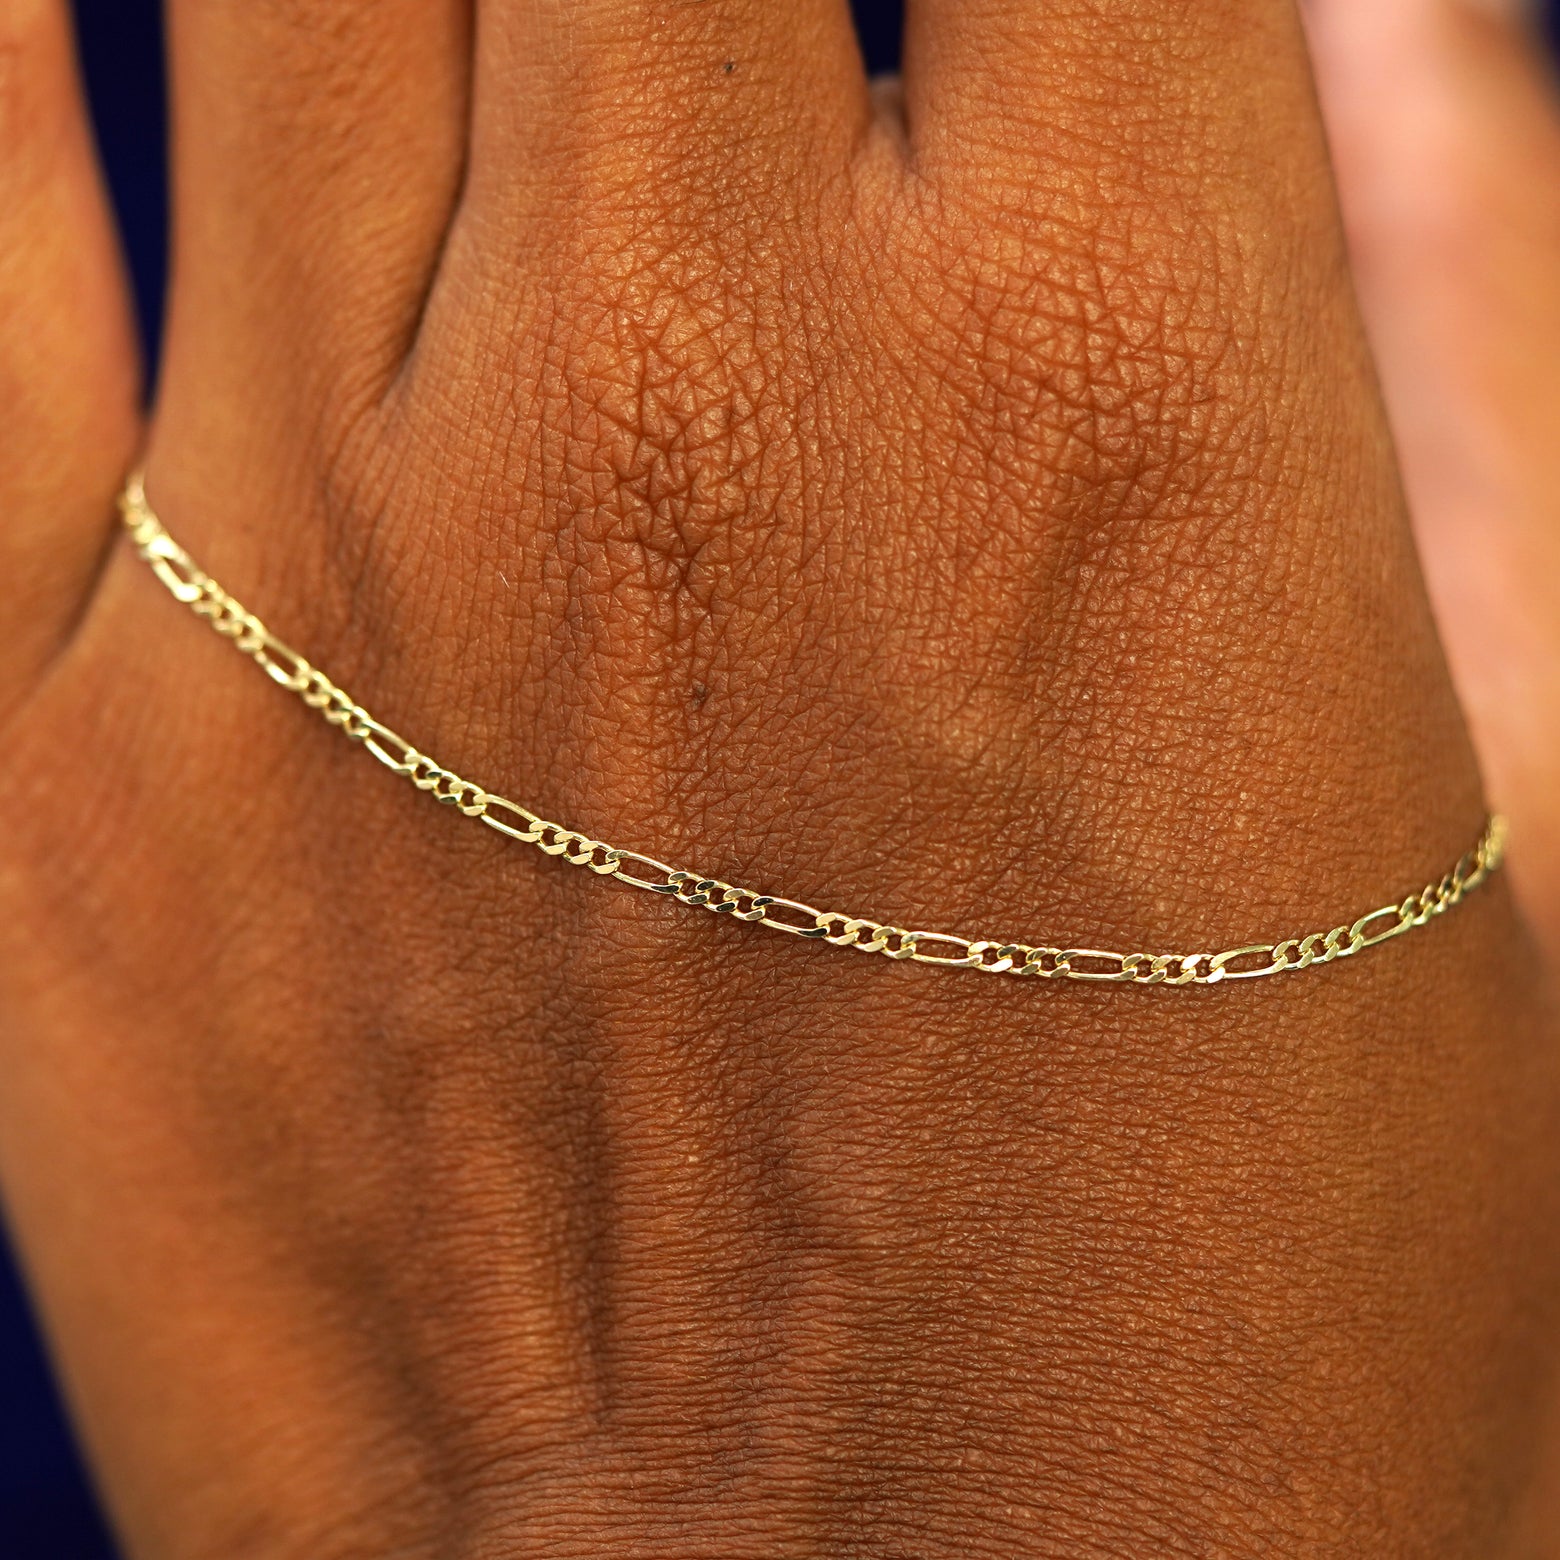 A solid gold Figaro Bracelet resting on the back of a model's hand